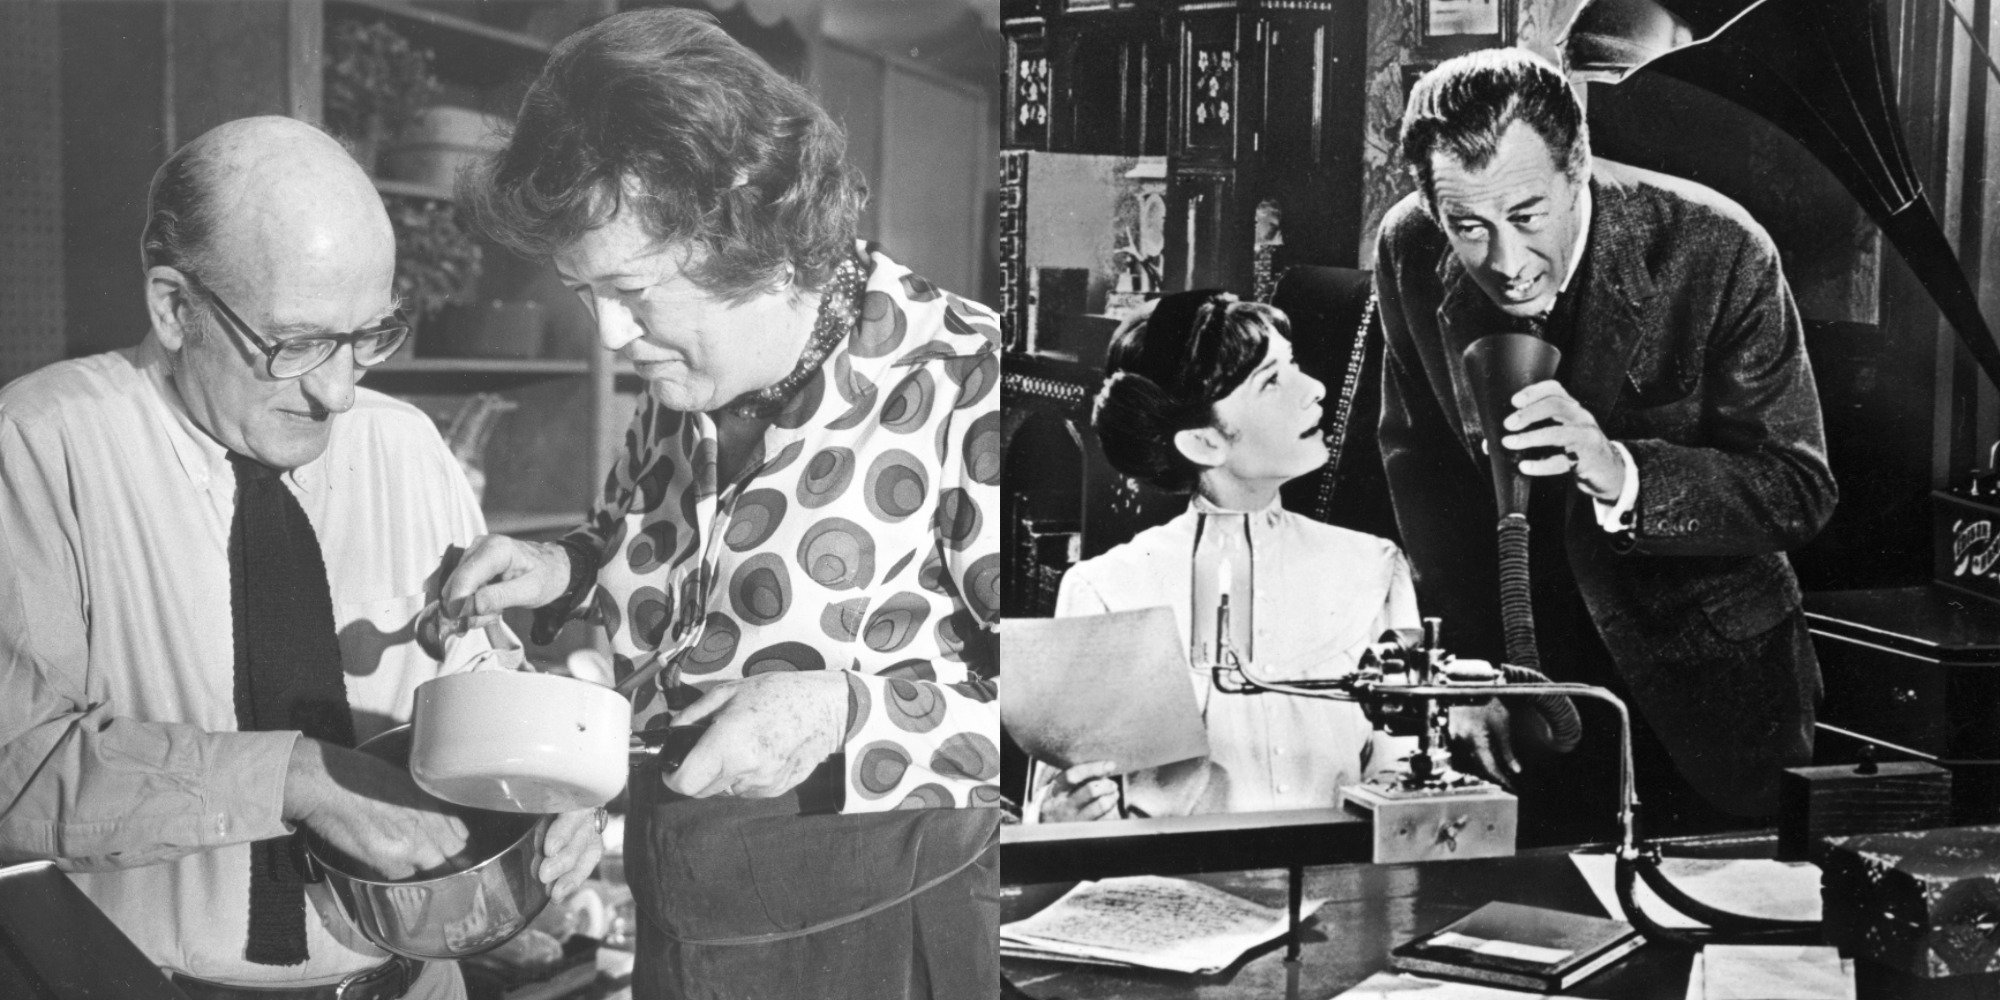 Paul and Julia Child in a photo montage next to My Fair Lady stars Audrey Hepburn and Rex Harrison.